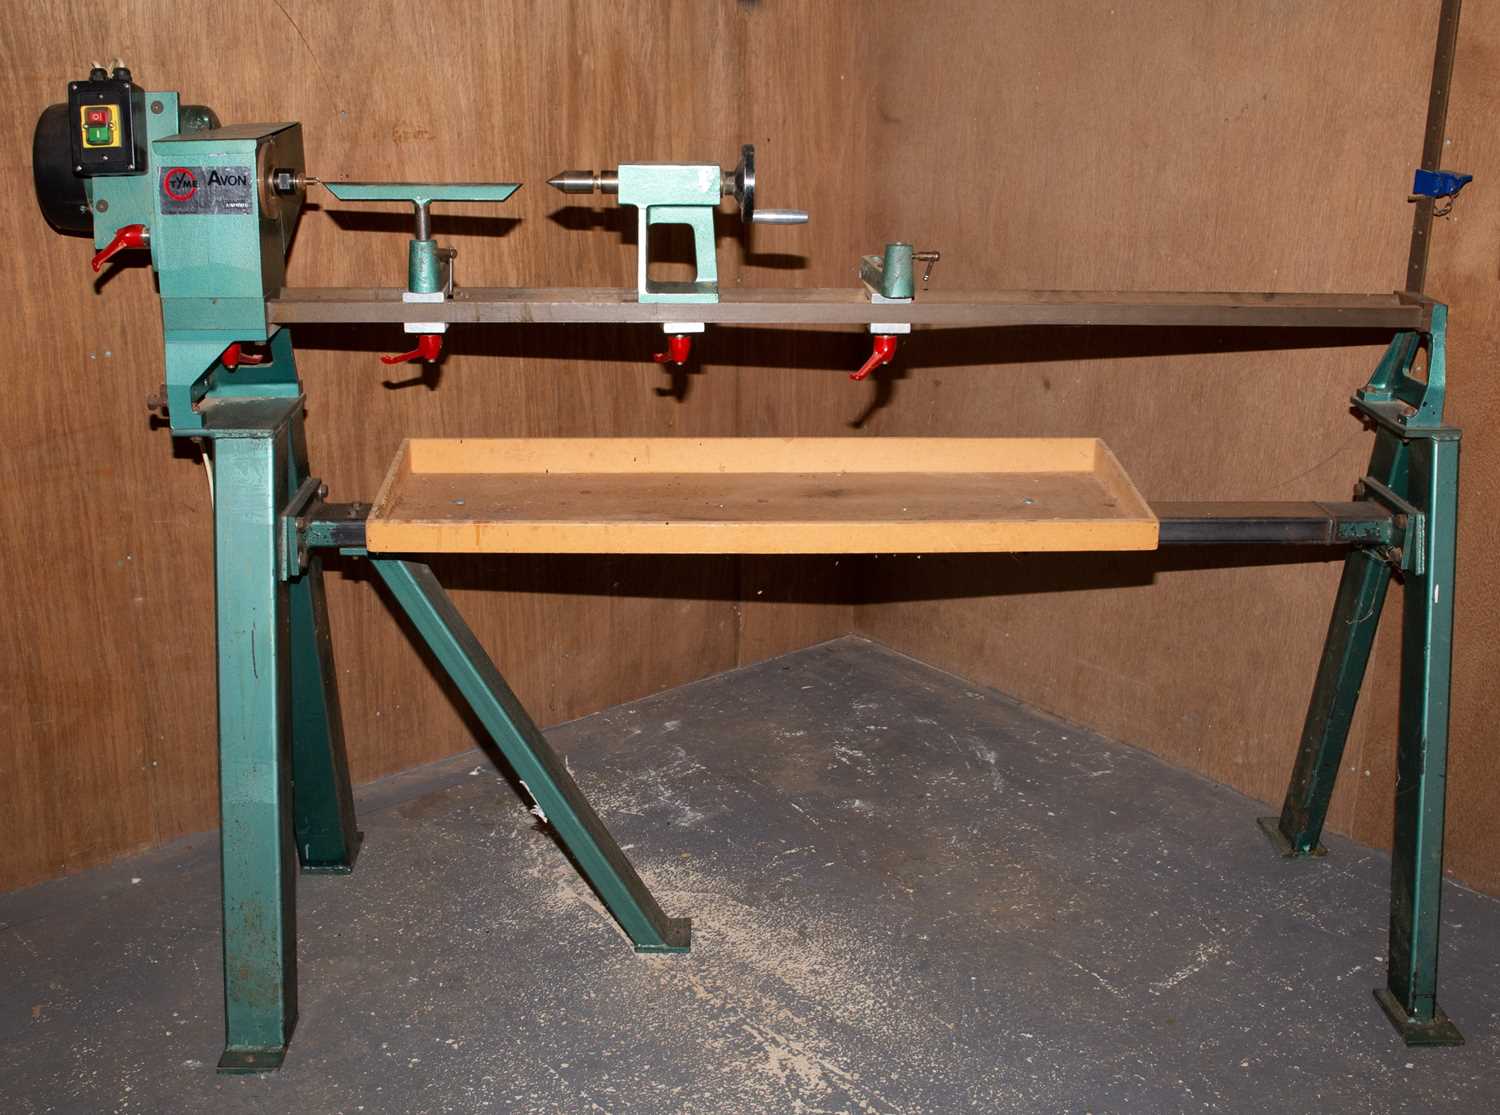 A Thyme Machines (Bristol) Ltd woodworking lathe on an integral stand, the bed 149cm long, serial